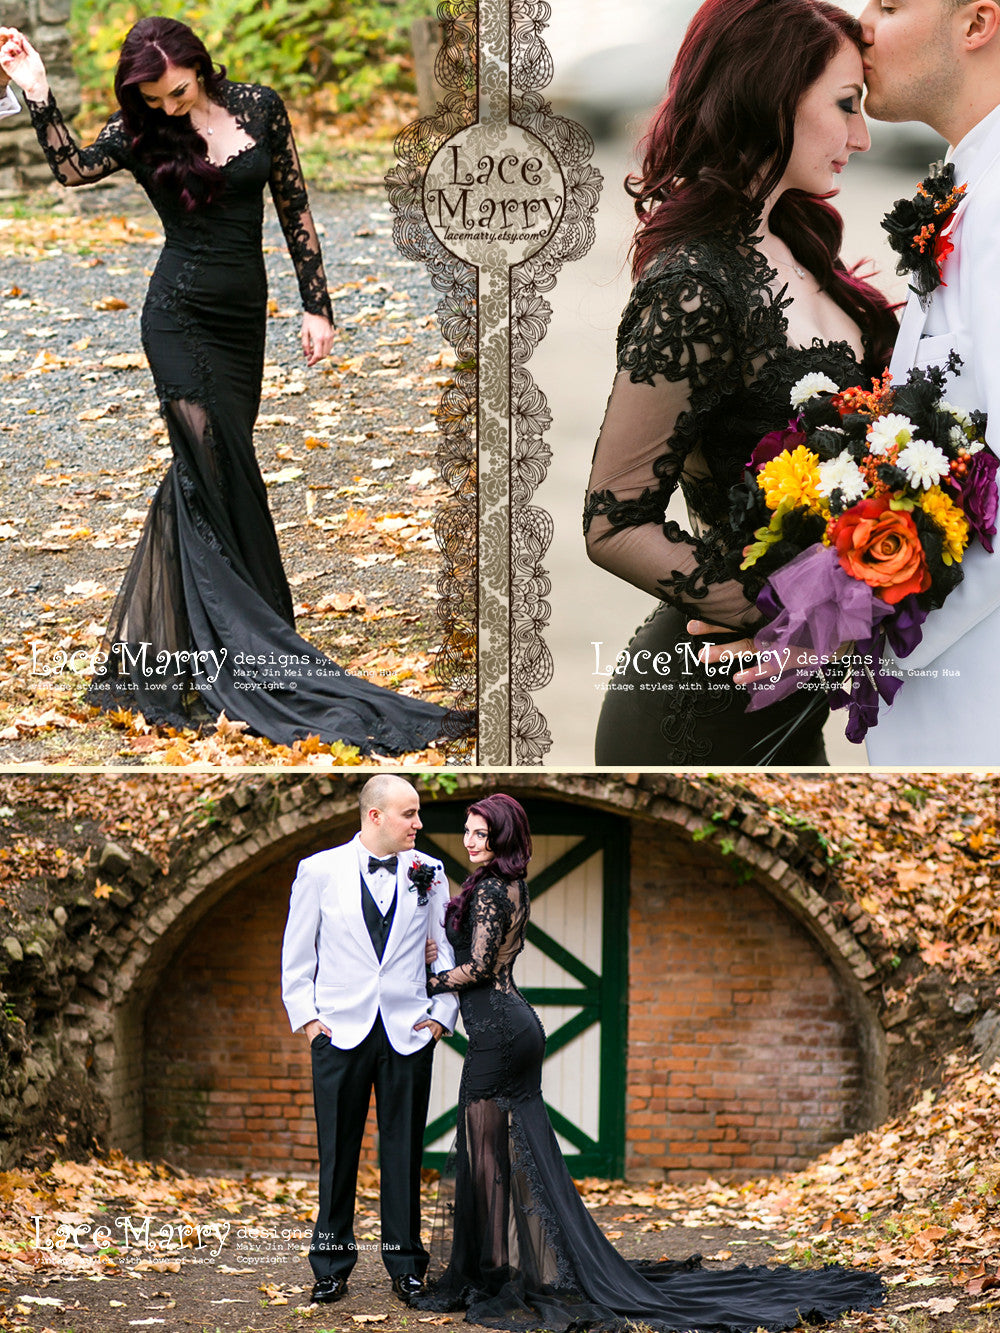 Exclusive Black Lace Wedding Dress with Sheer Sleeves